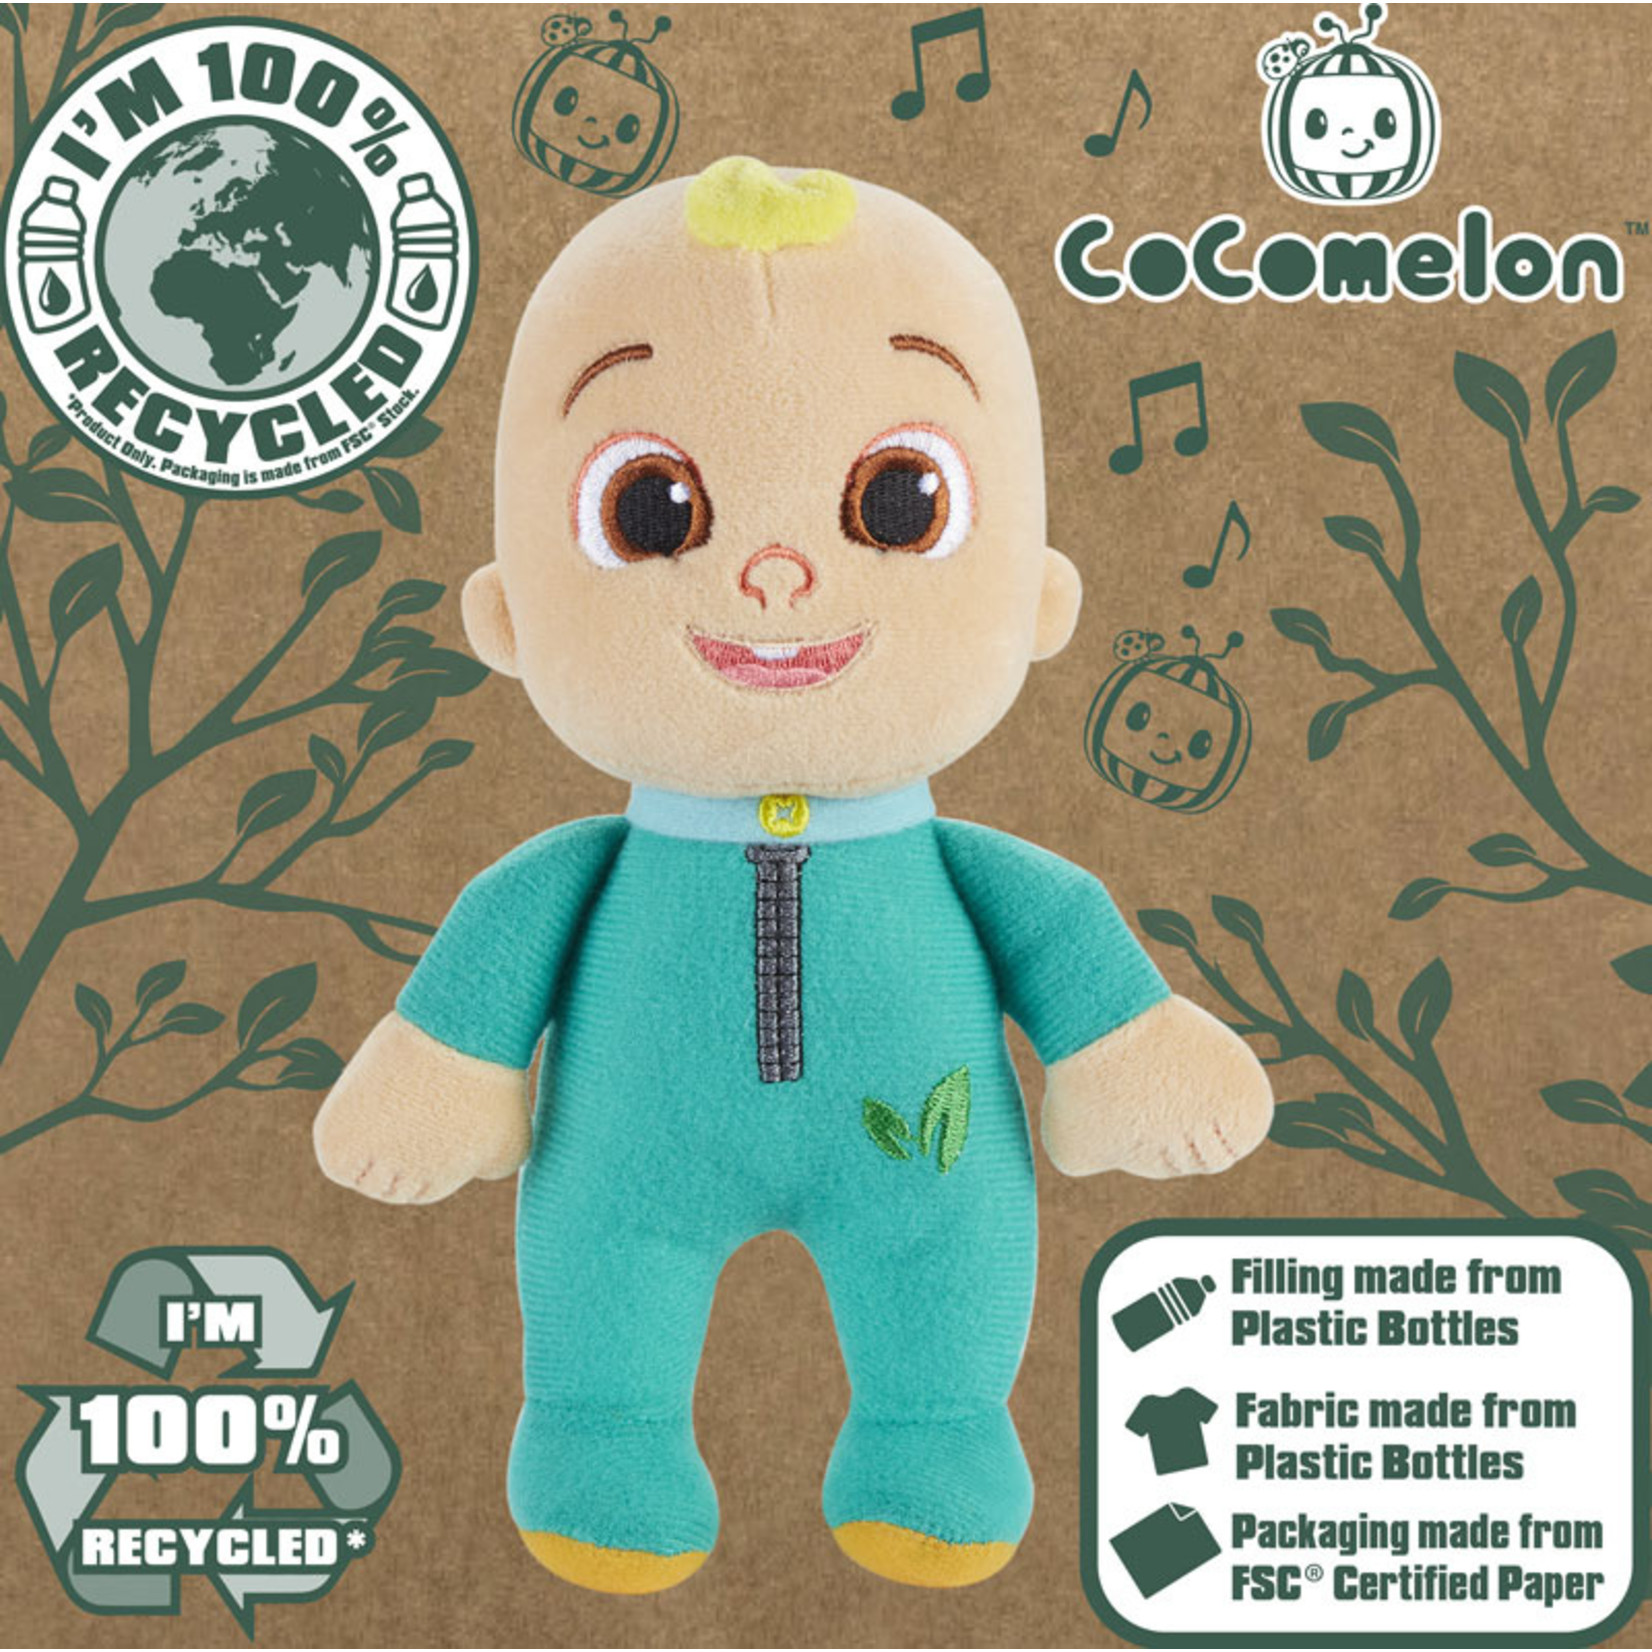 Character Cocomelon Eco knuffel - Onesie